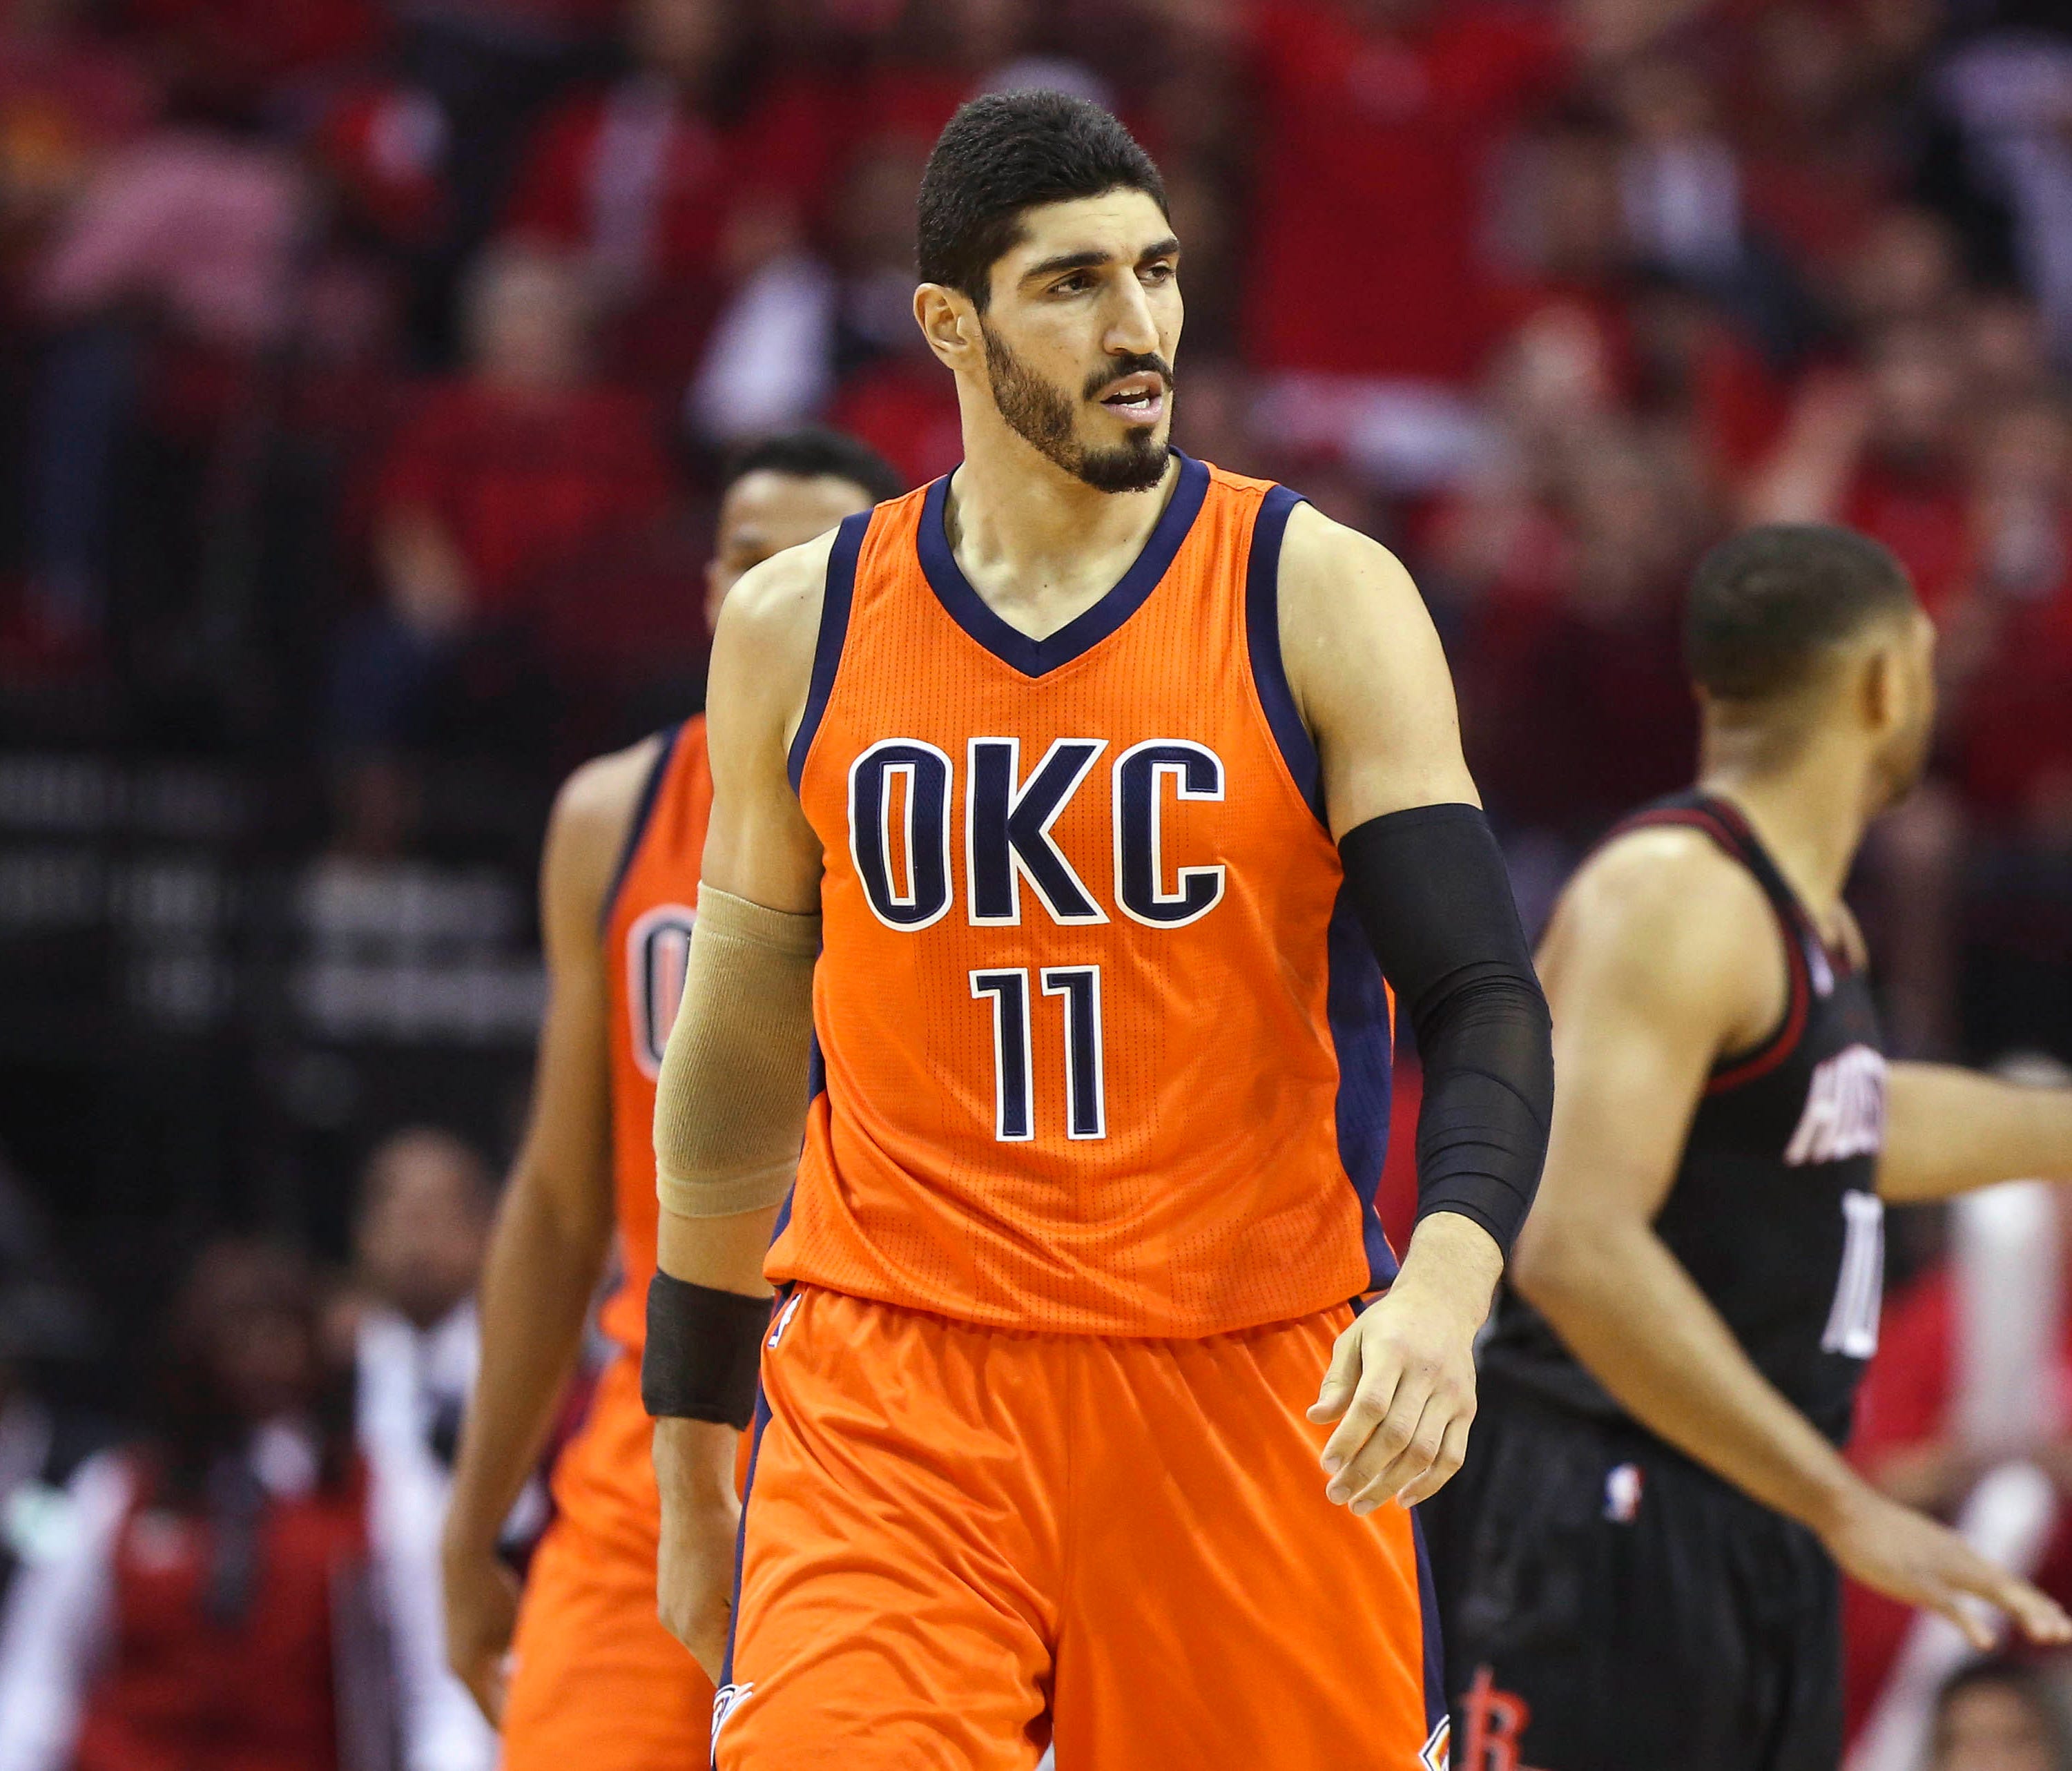 Oklahoma City Thunder center Enes Kanter (11) reacts after a play in game one of the first round of the 2017 NBA Playoffs against the Houston Rockets at Toyota Center.